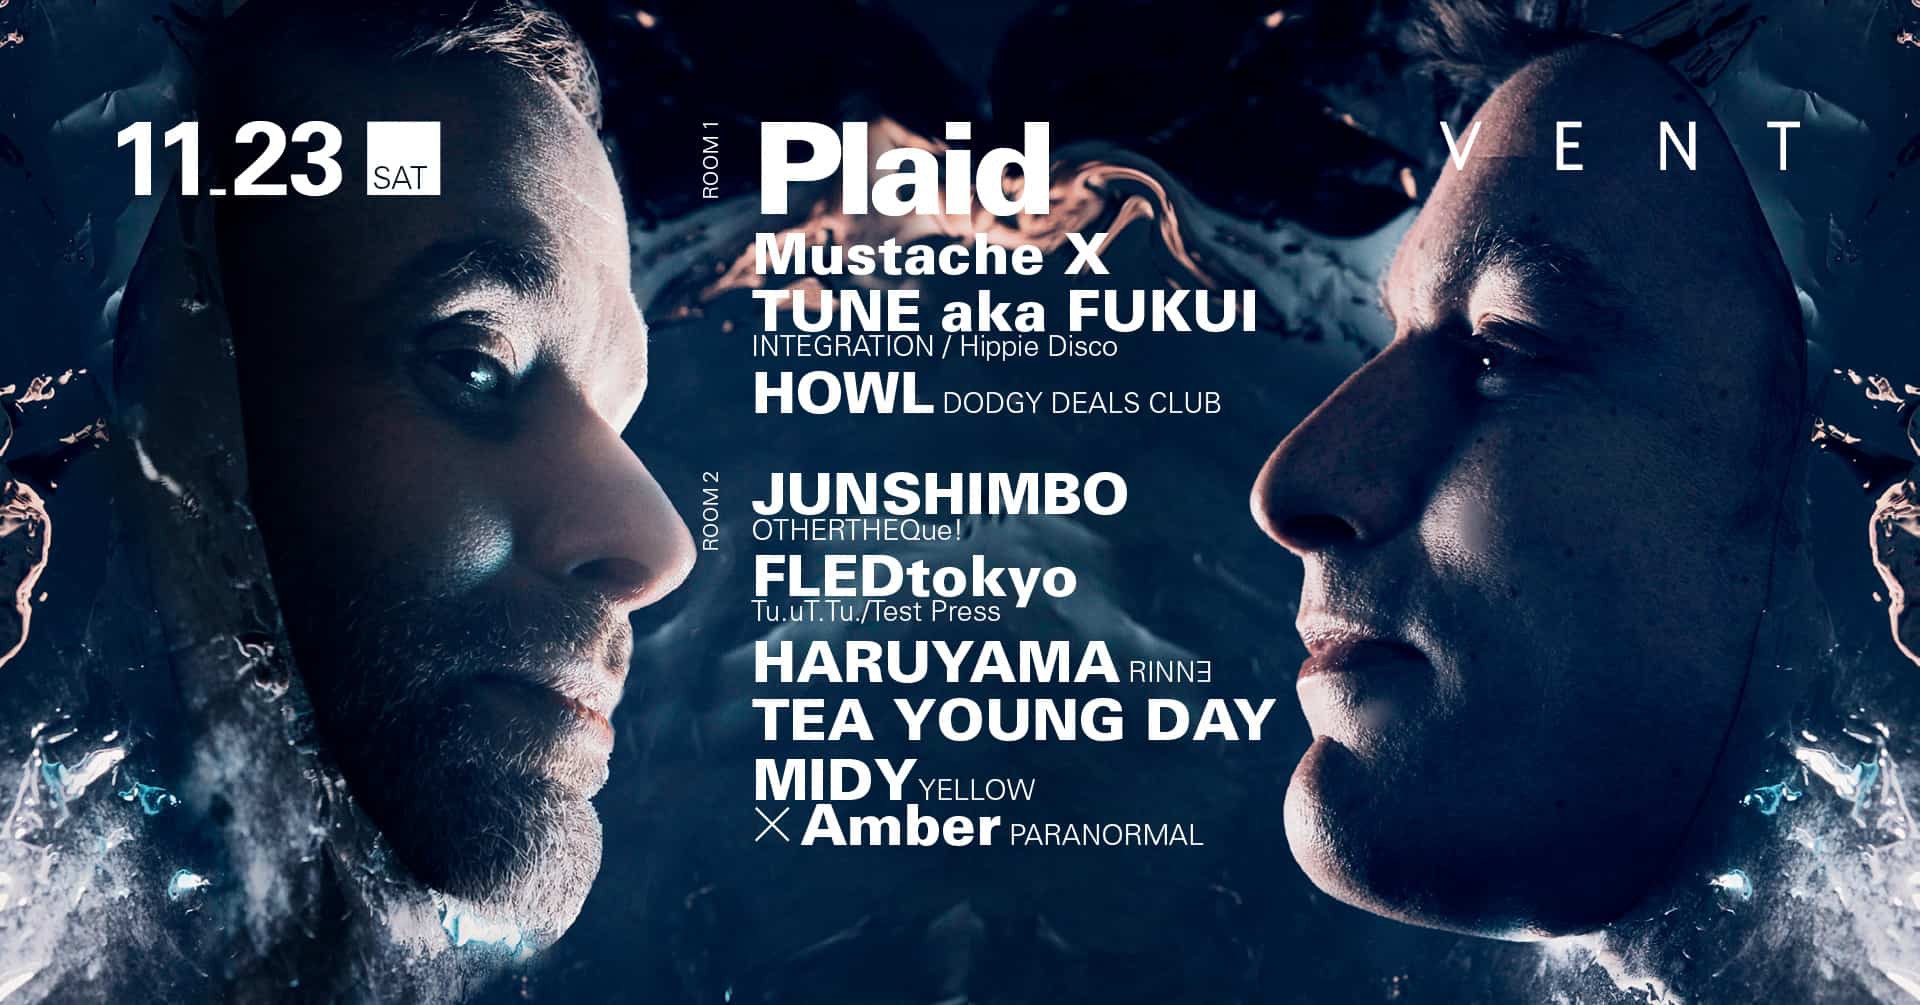 Plaid will laying down an epic live audio/visual set at VENT Omotesando, on November 23rd!